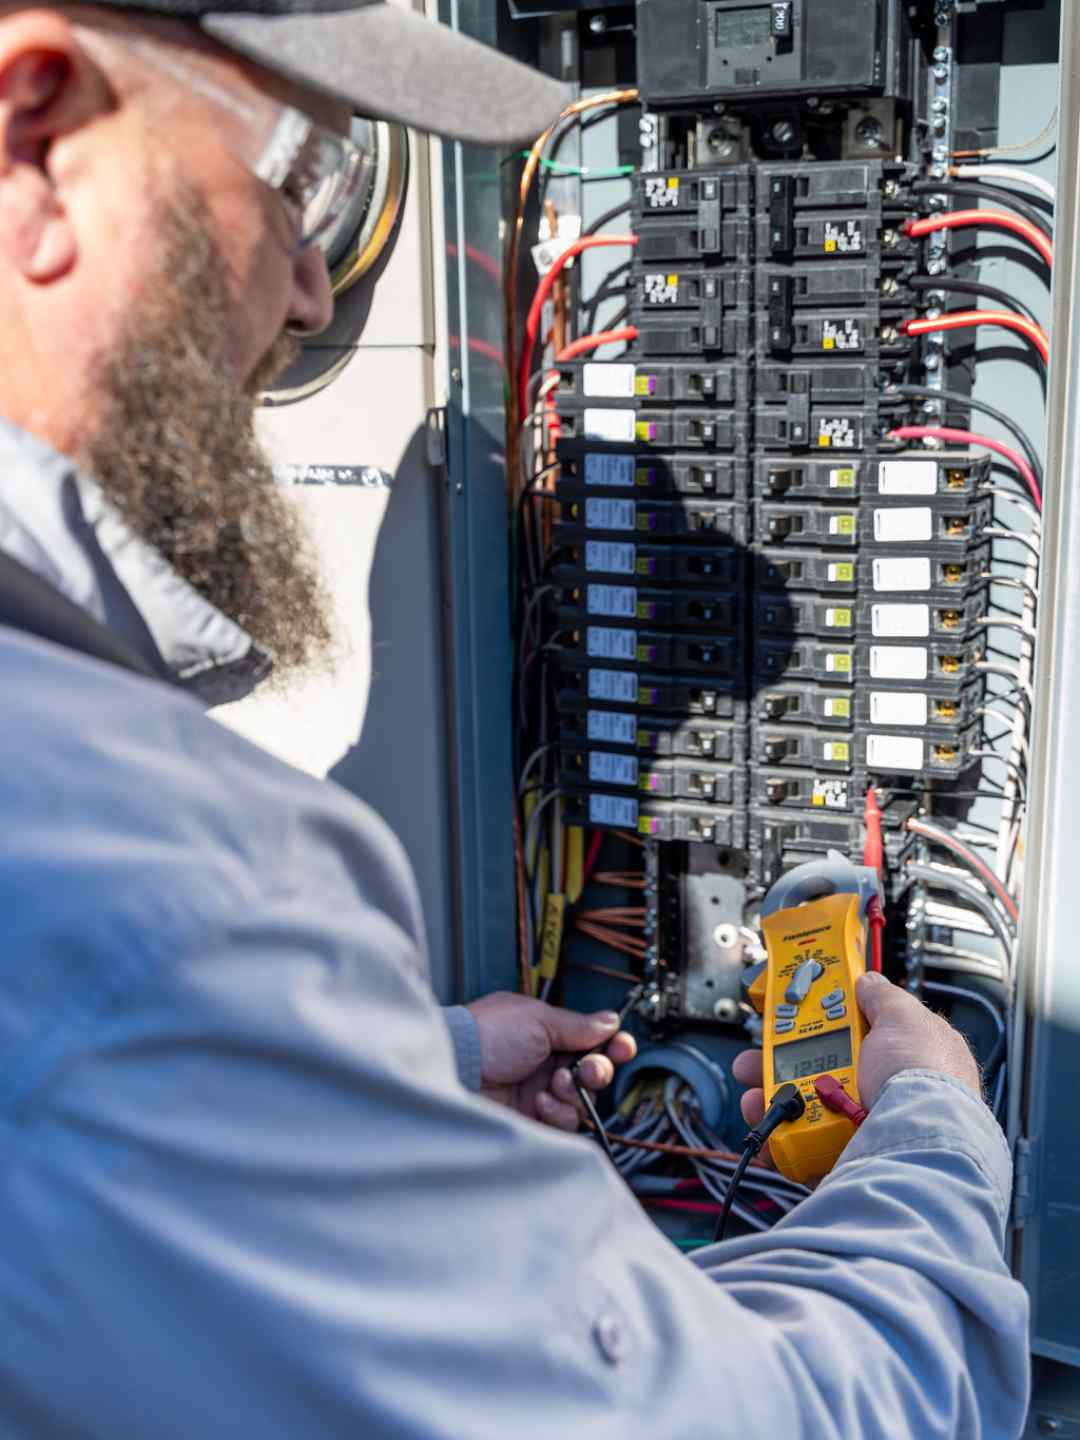 Electrical panel safety inspection in Tucson by Done Right Services to prevent emergency issues.